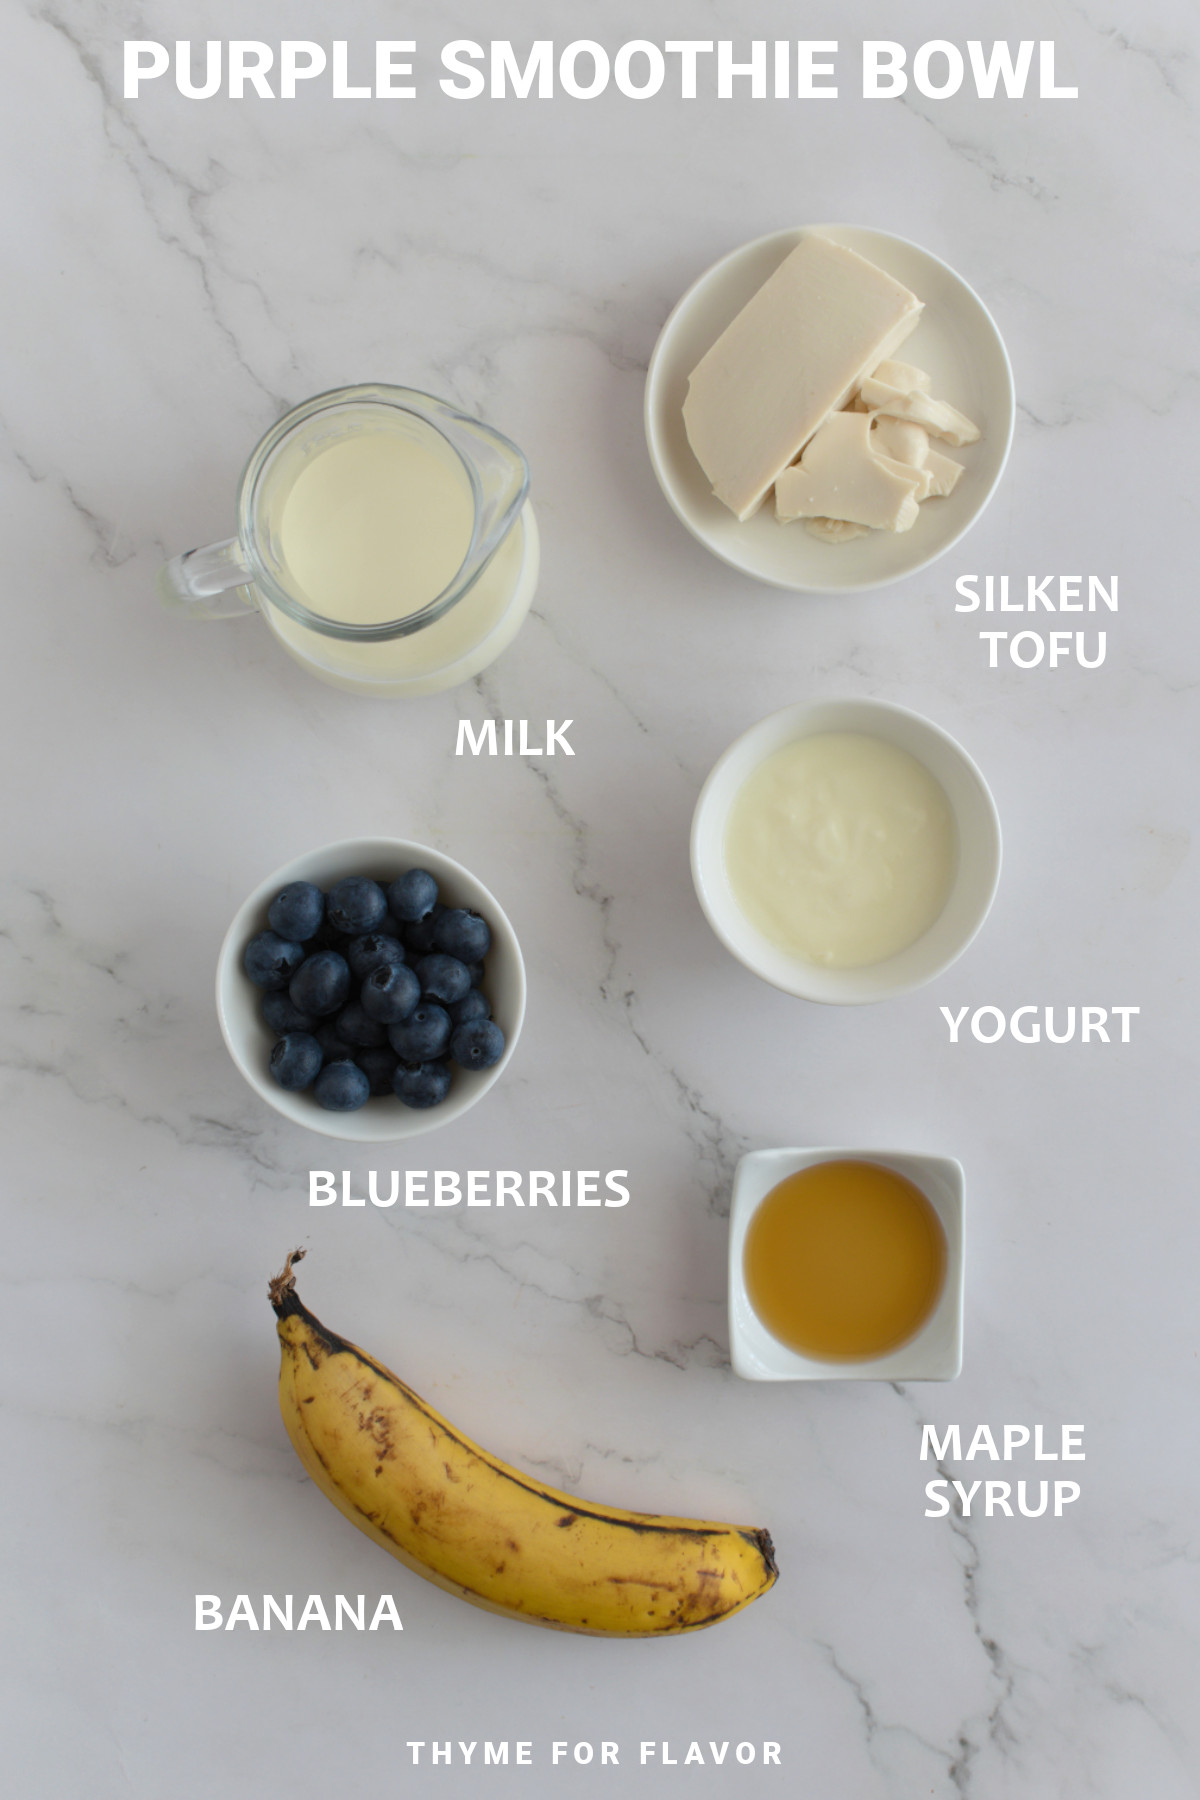 Ingredients for purple smoothie bowl.